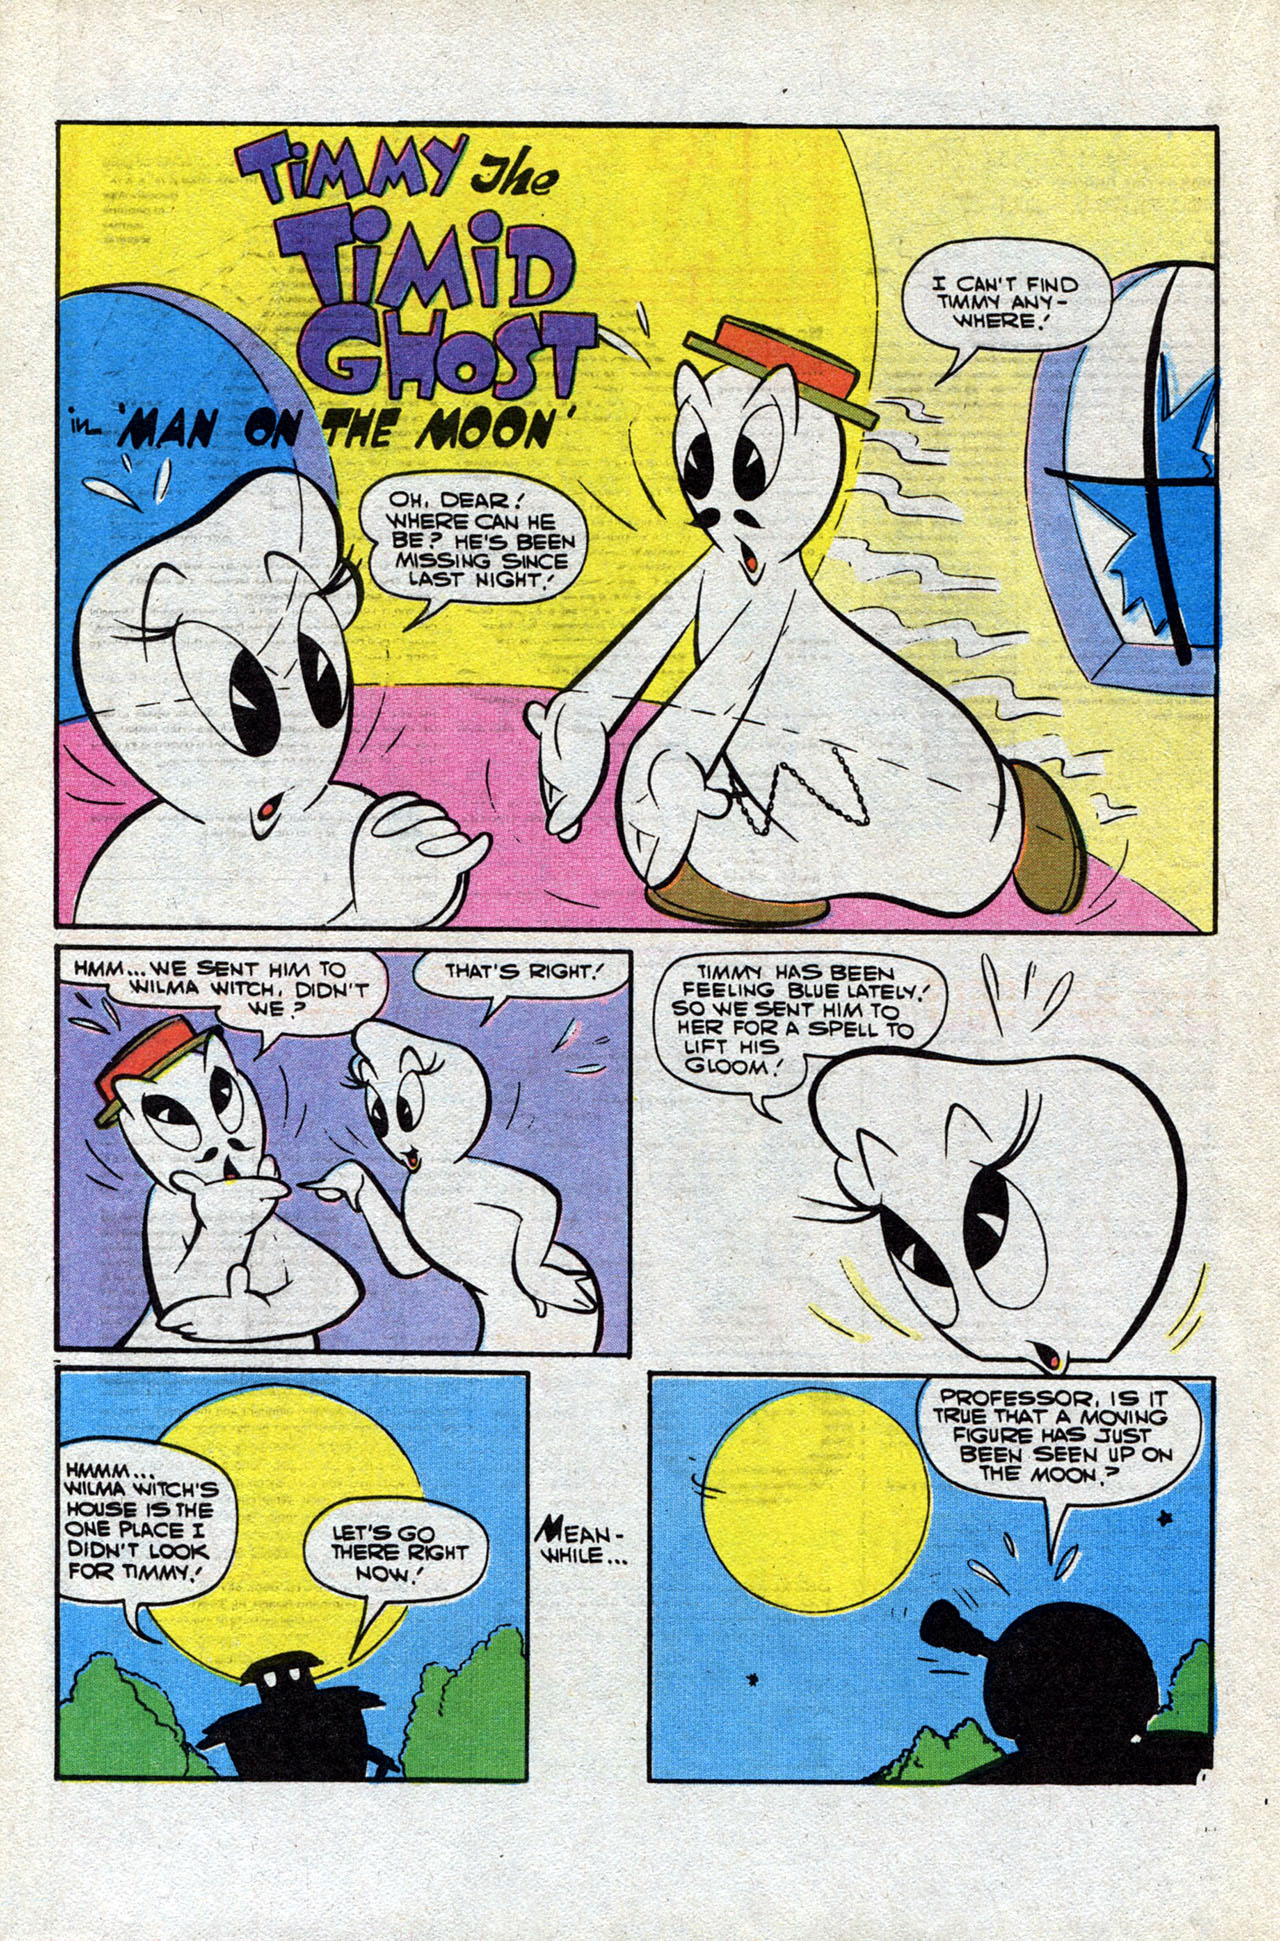 Read online Timmy the Timid Ghost comic -  Issue #25 - 16